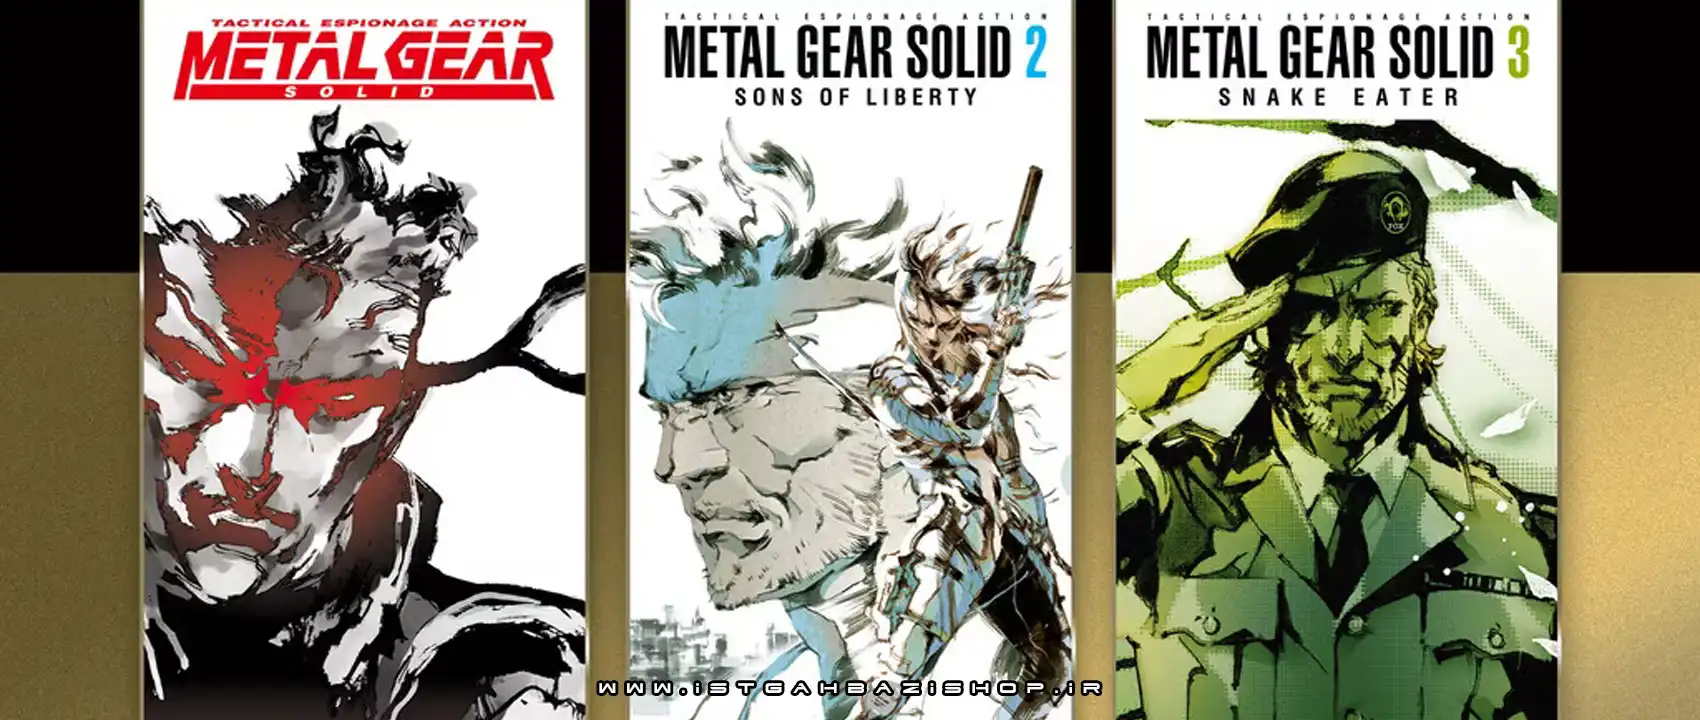 Metal Gear Solid Master Collection نینتندو سوئیچ